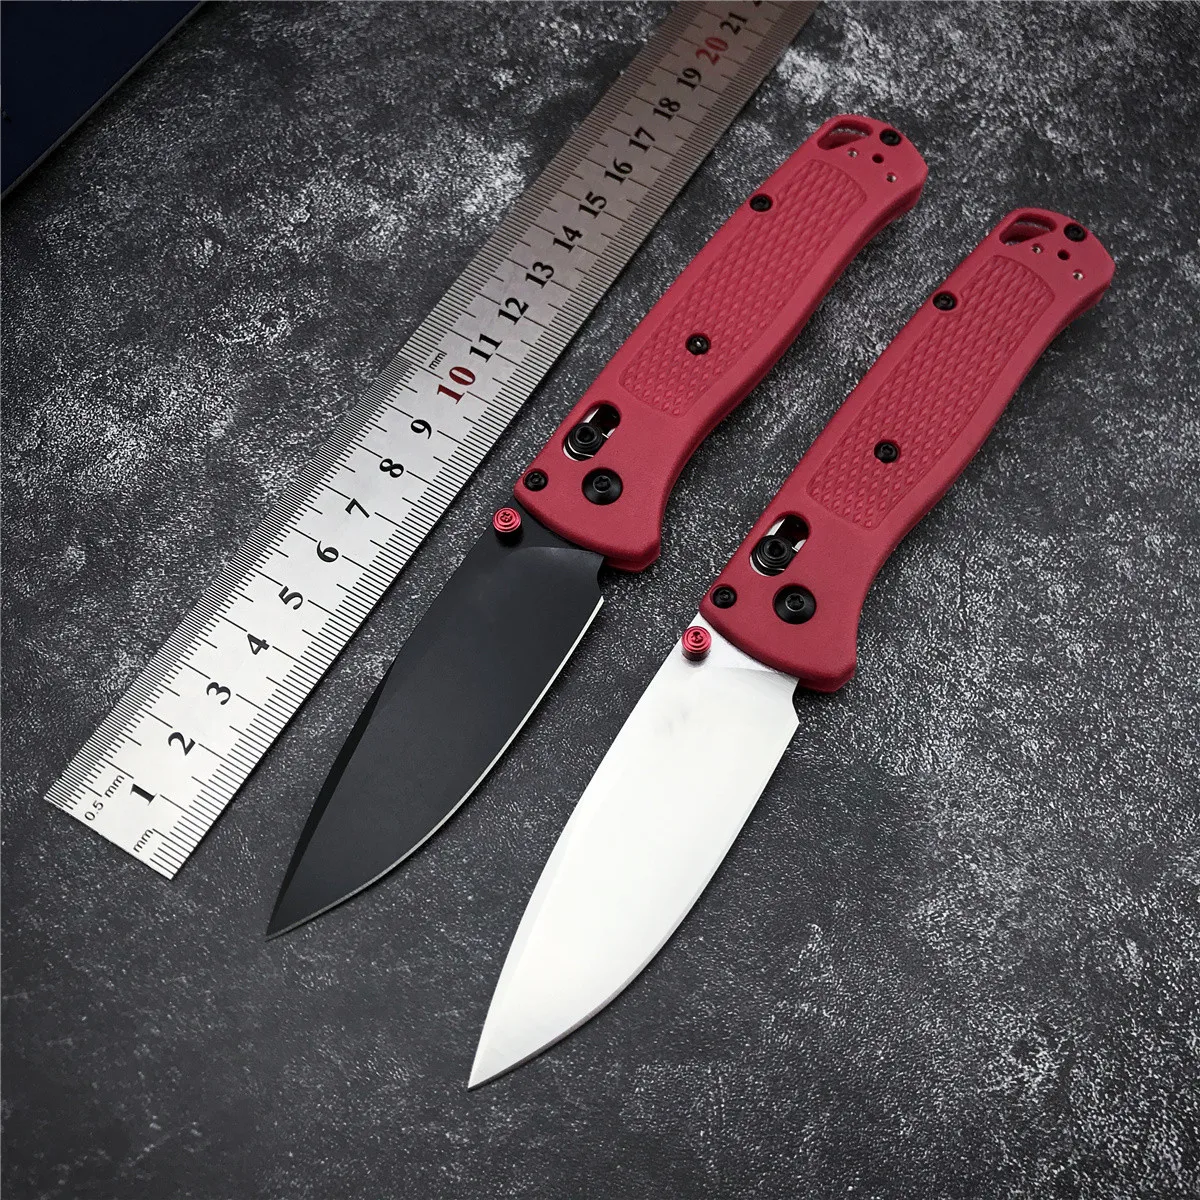 

BM 535 AXIS Folding Knife Mark S30v Blade Tactical Outdoor Camping Hunting Knife Portable Self Defense Multi EDC Tool Red Handle